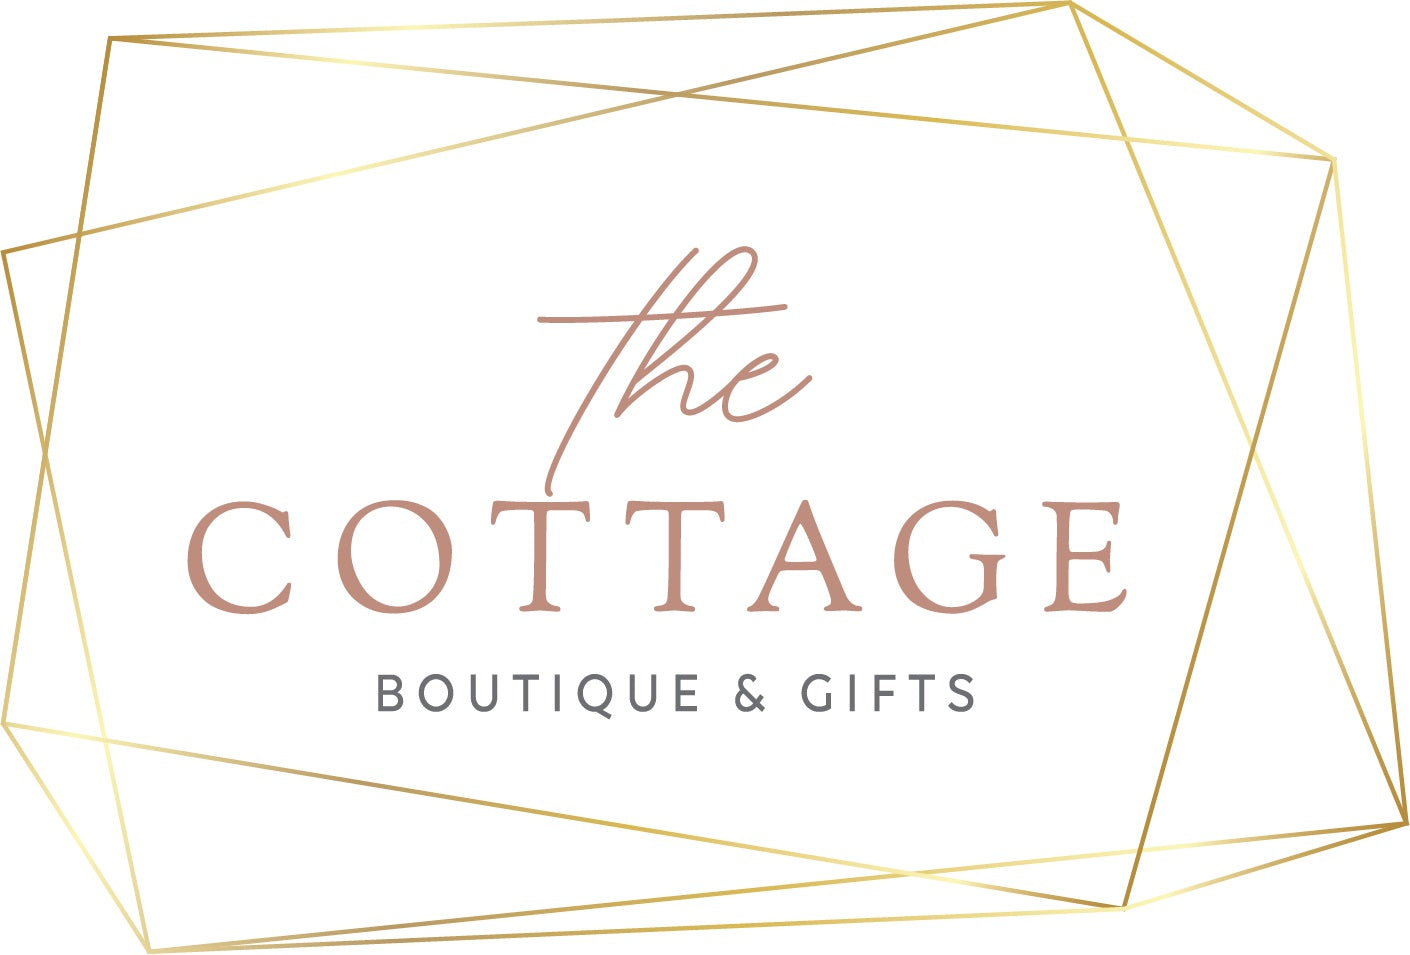 The Cottage Boutique and Gifts Gift Card